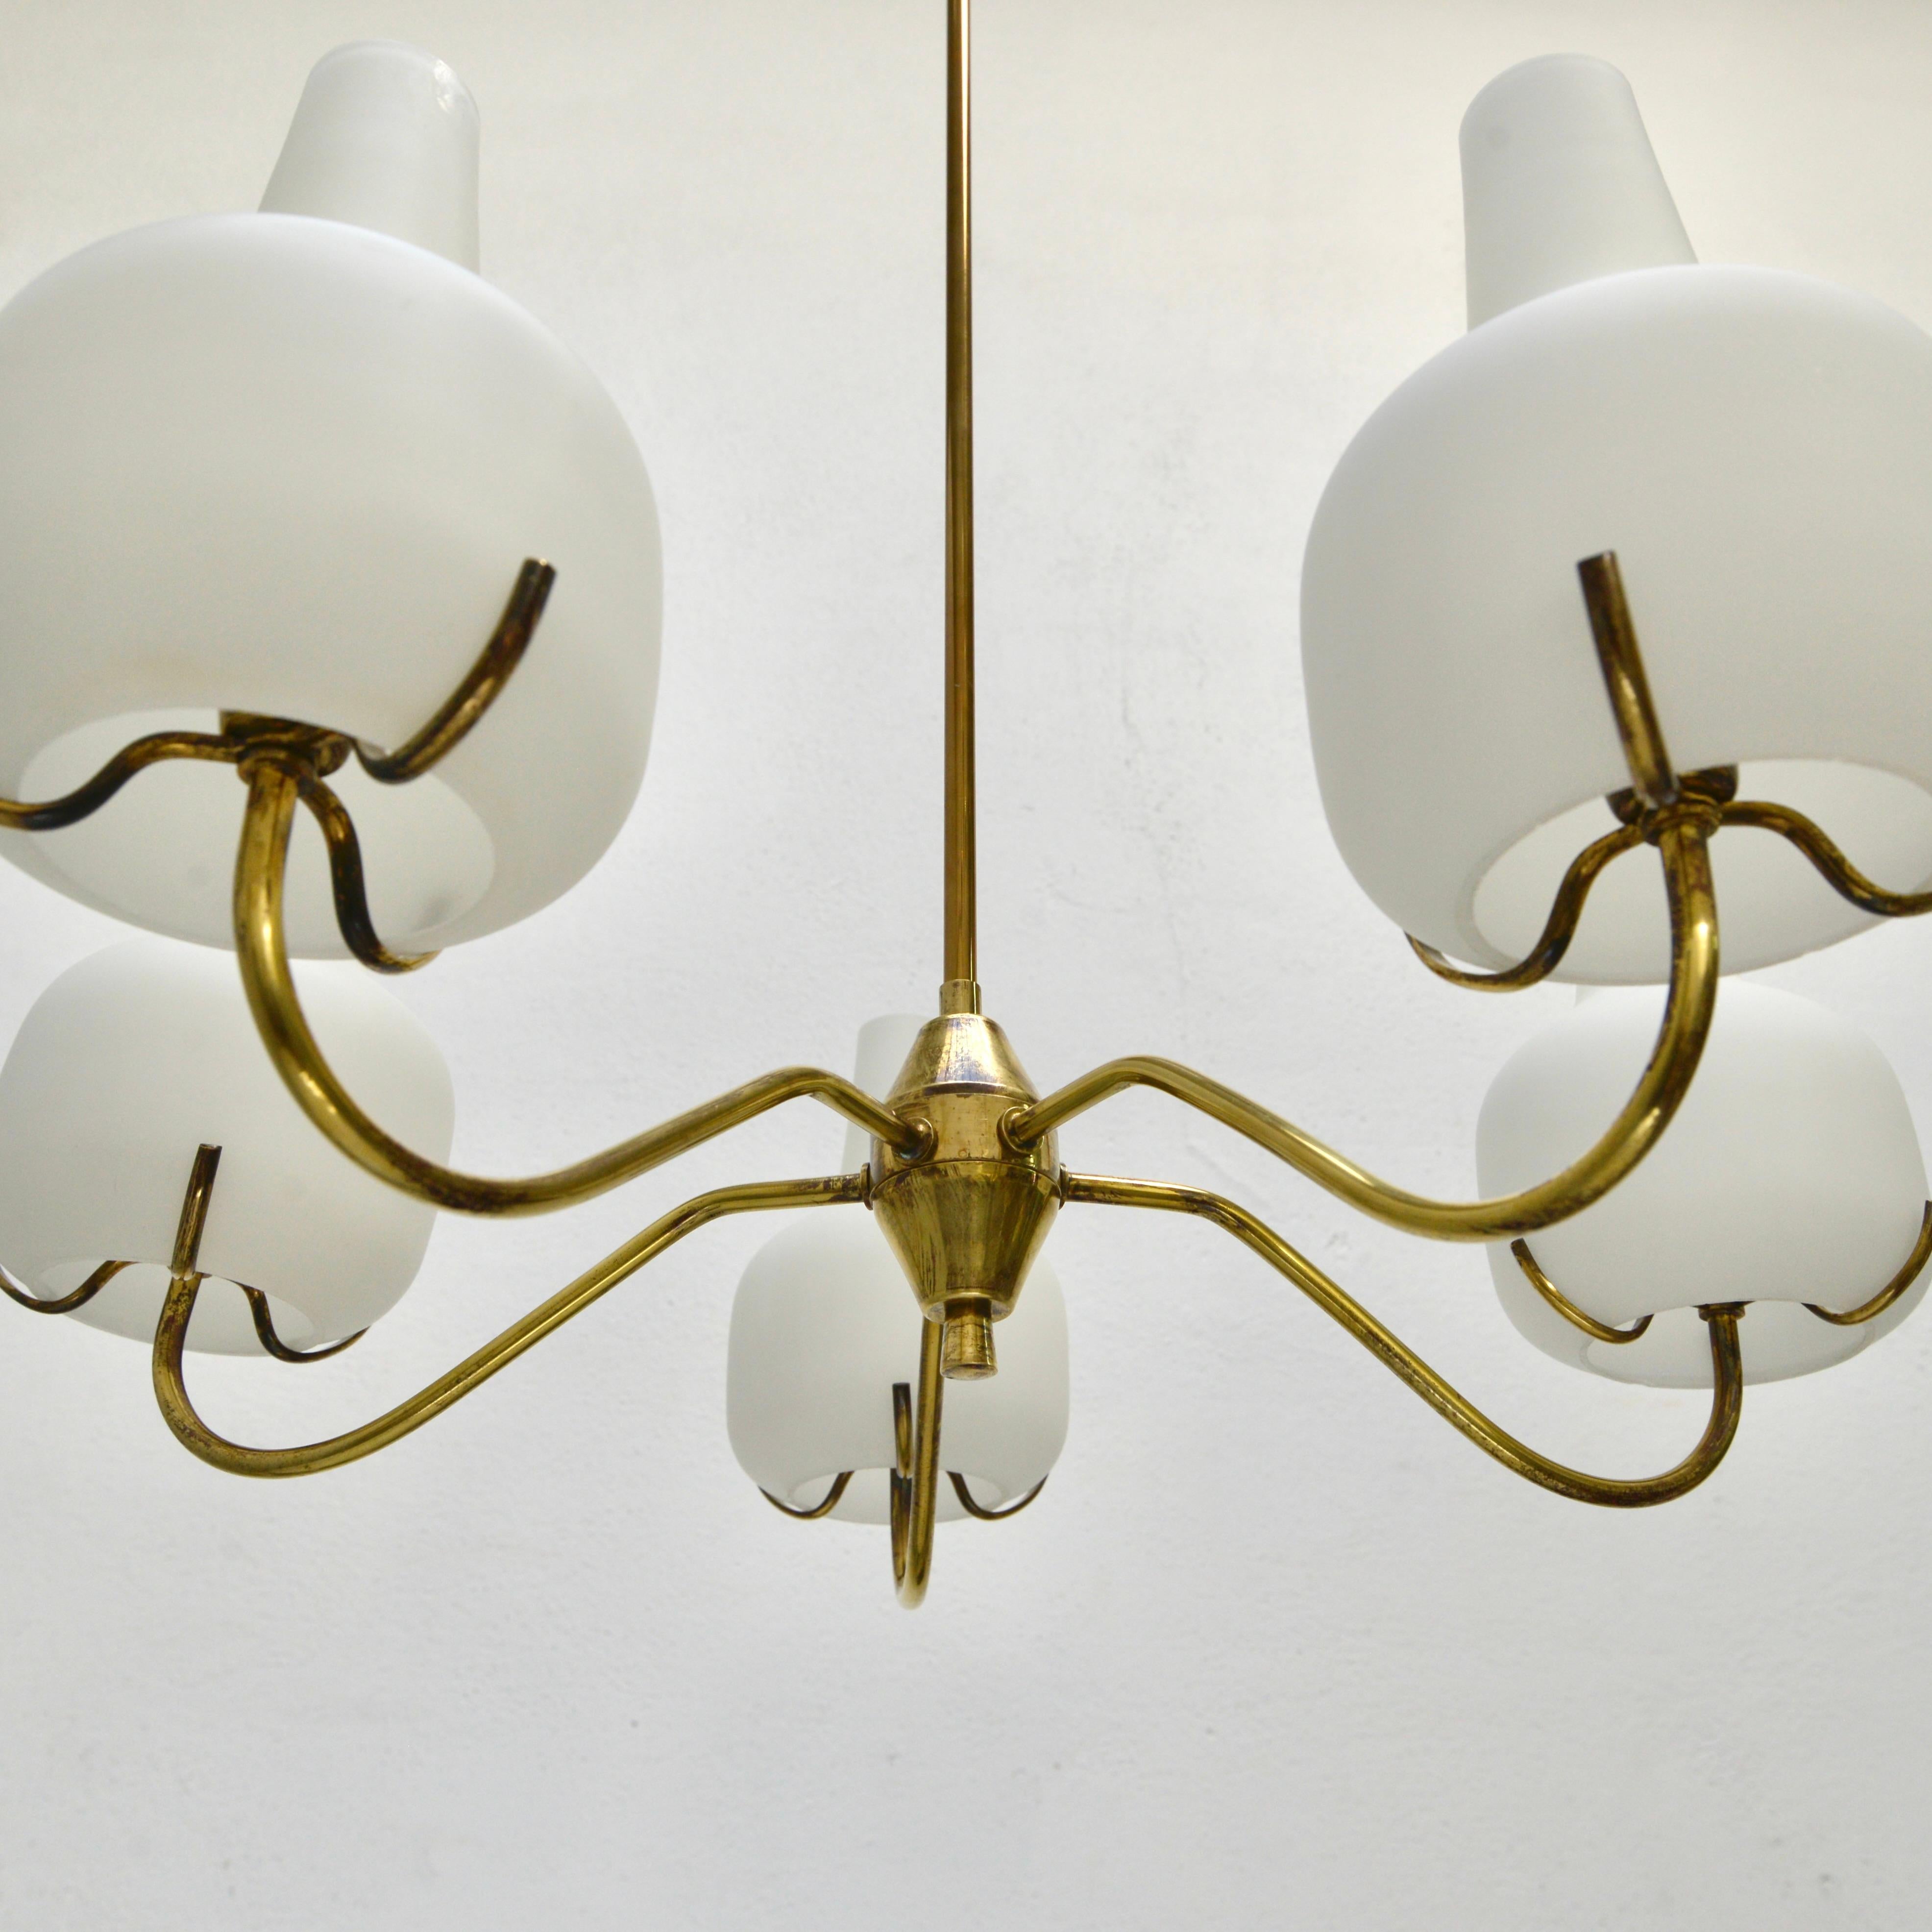 Of the period mid century Italian 5 shade 1950s chandelier by Stilnovo. Naturally aged brass of many years and hand blown glass shades of the period. Wired with 5-E12 candelabra based sockets. Wired for use in the US. Light bulbs included with